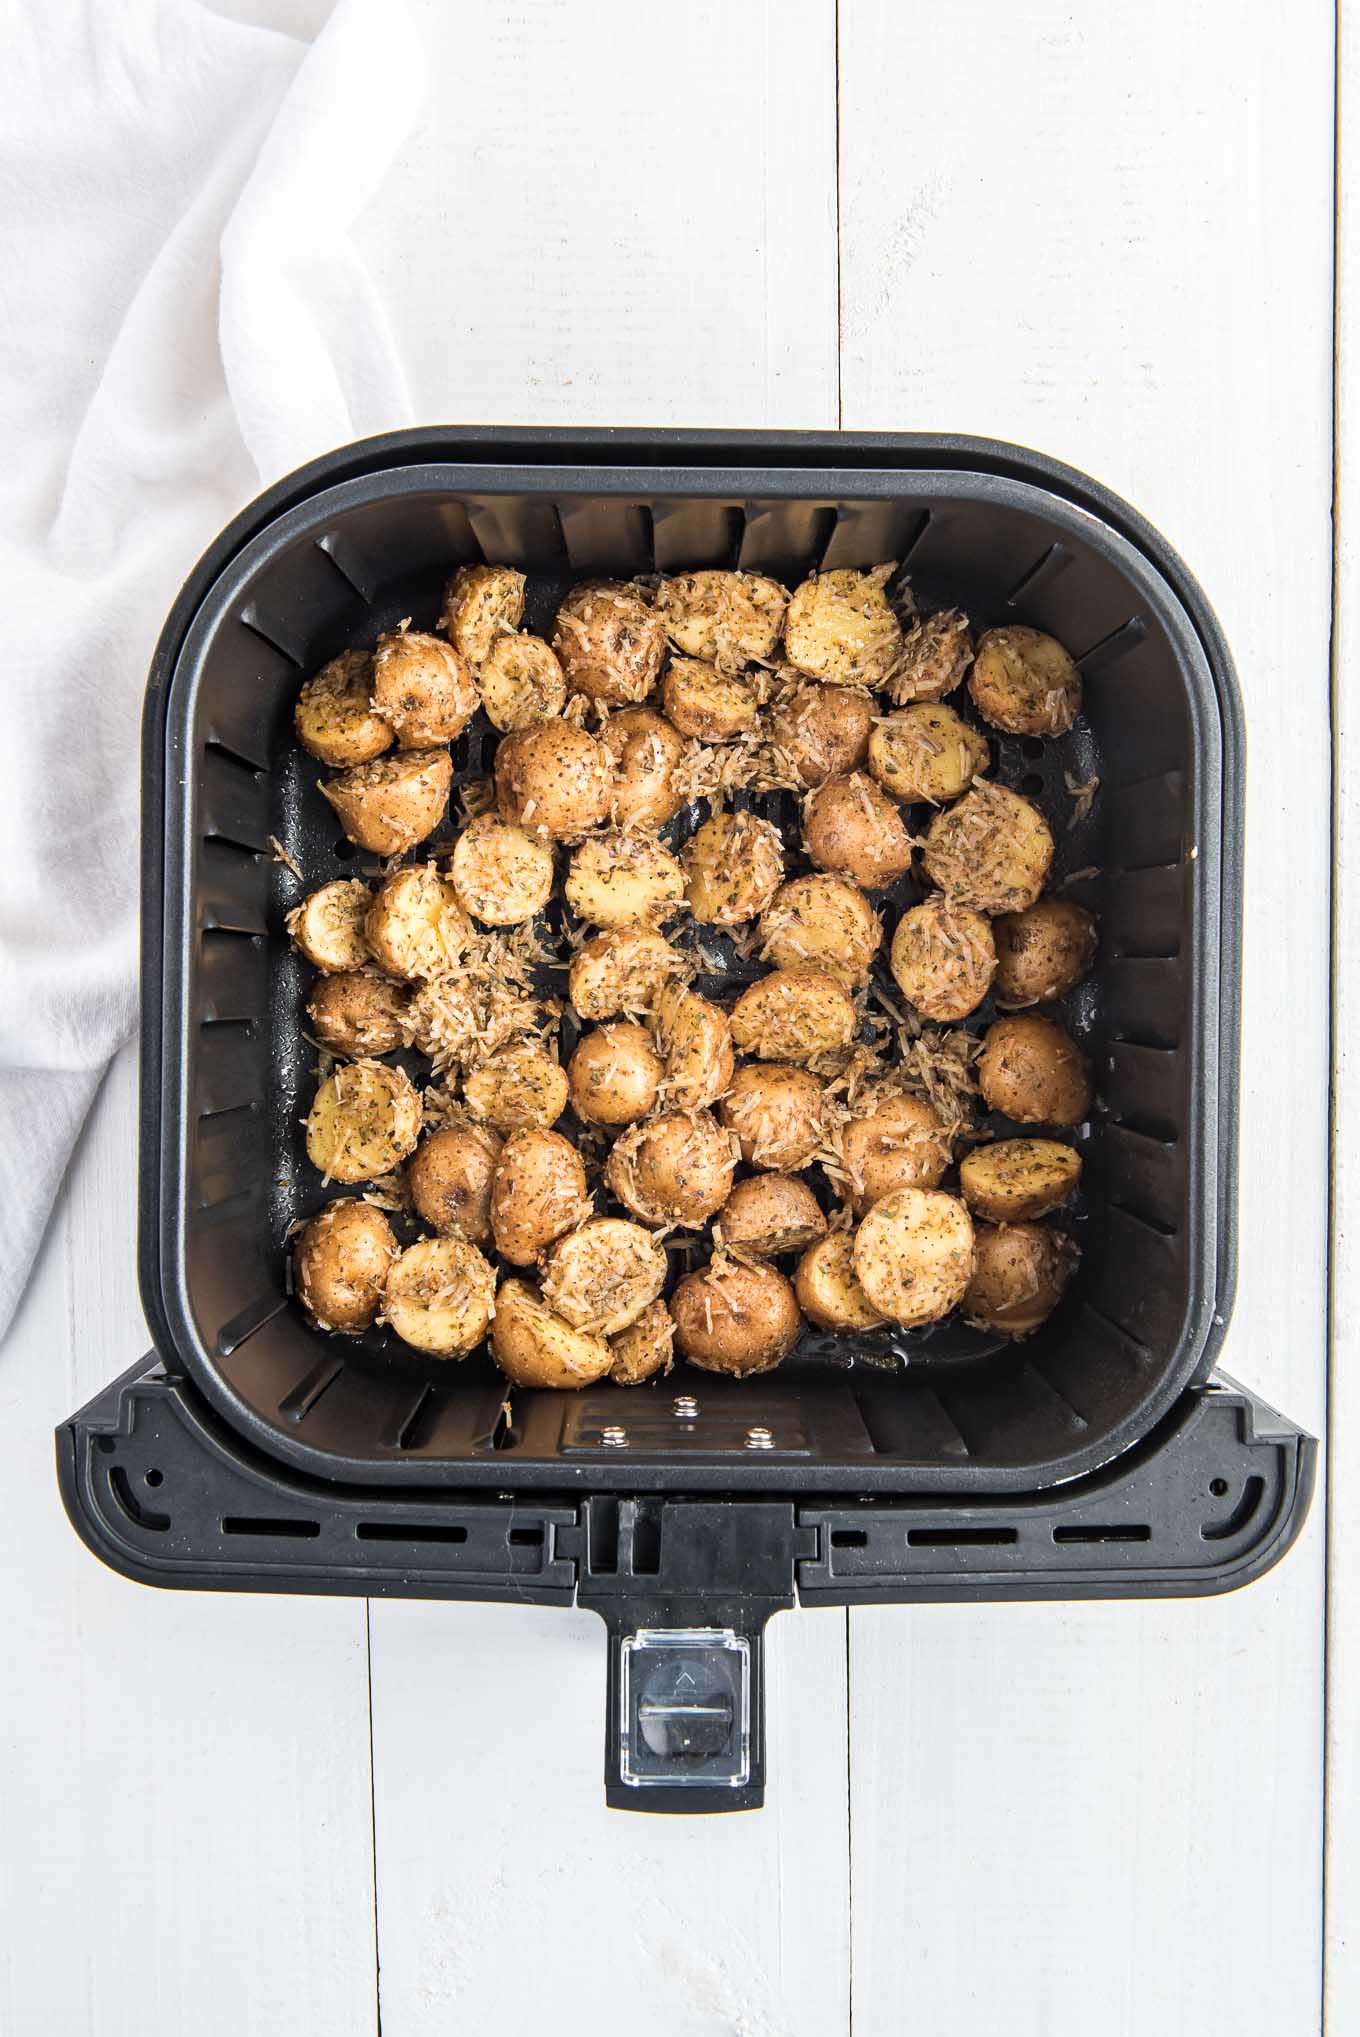 Small potatoes in air fryer basket ready to cook.